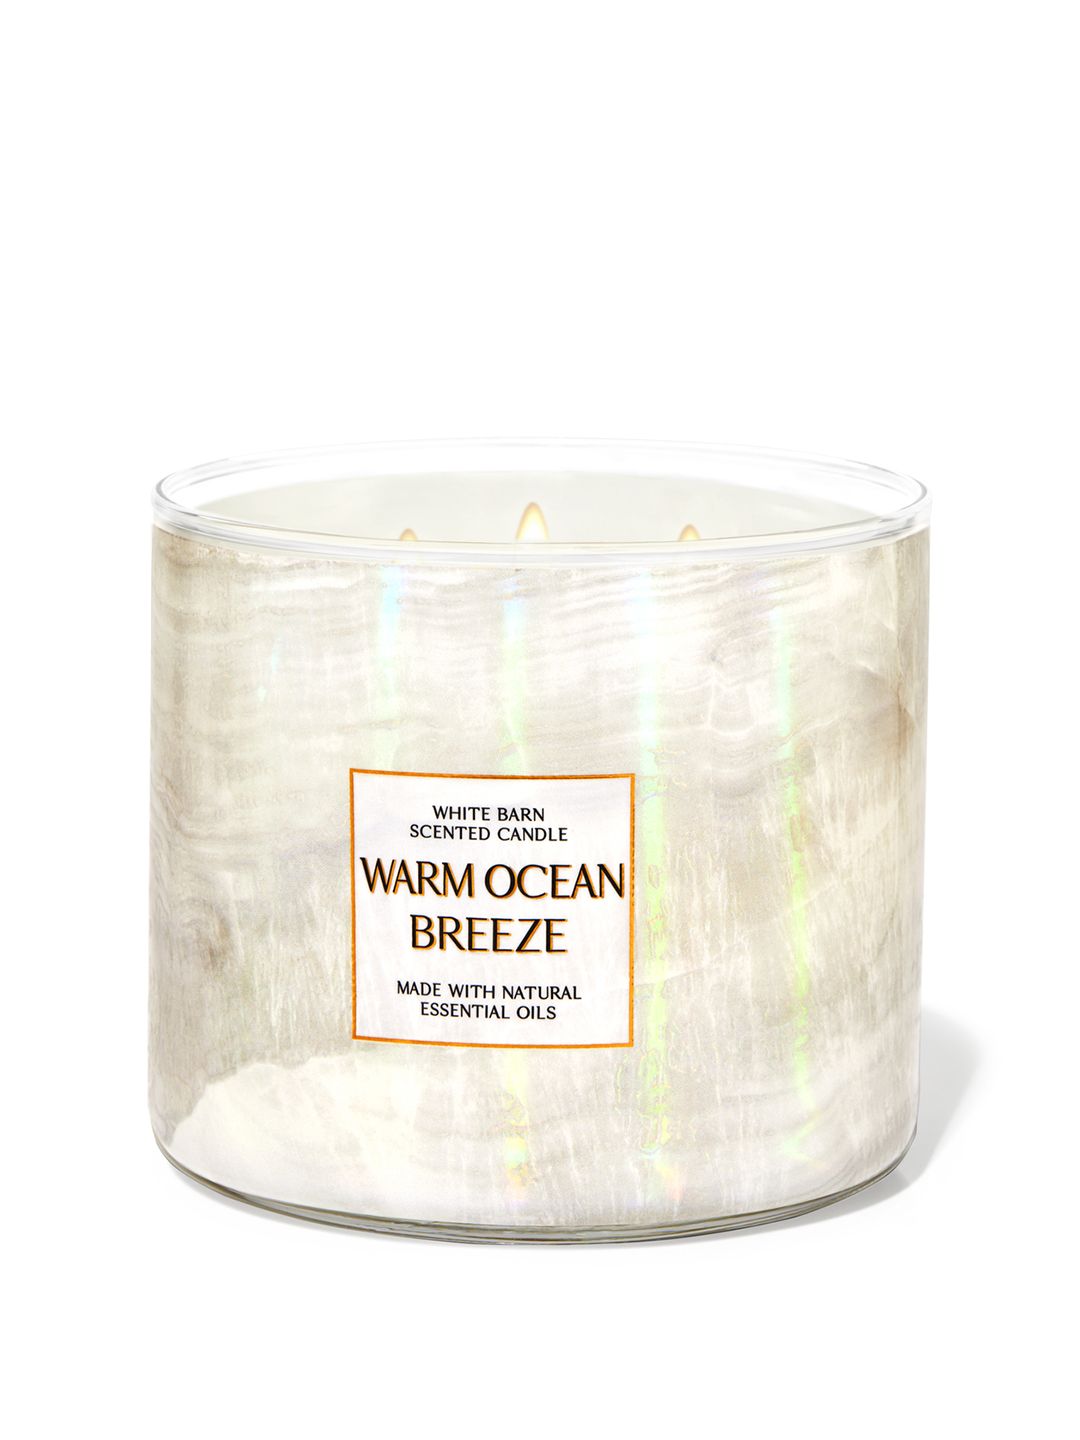 Bath & Body Works Warm Ocean Breeze 3-Wick Scented Candle with Essential Oils - 411g Price in India